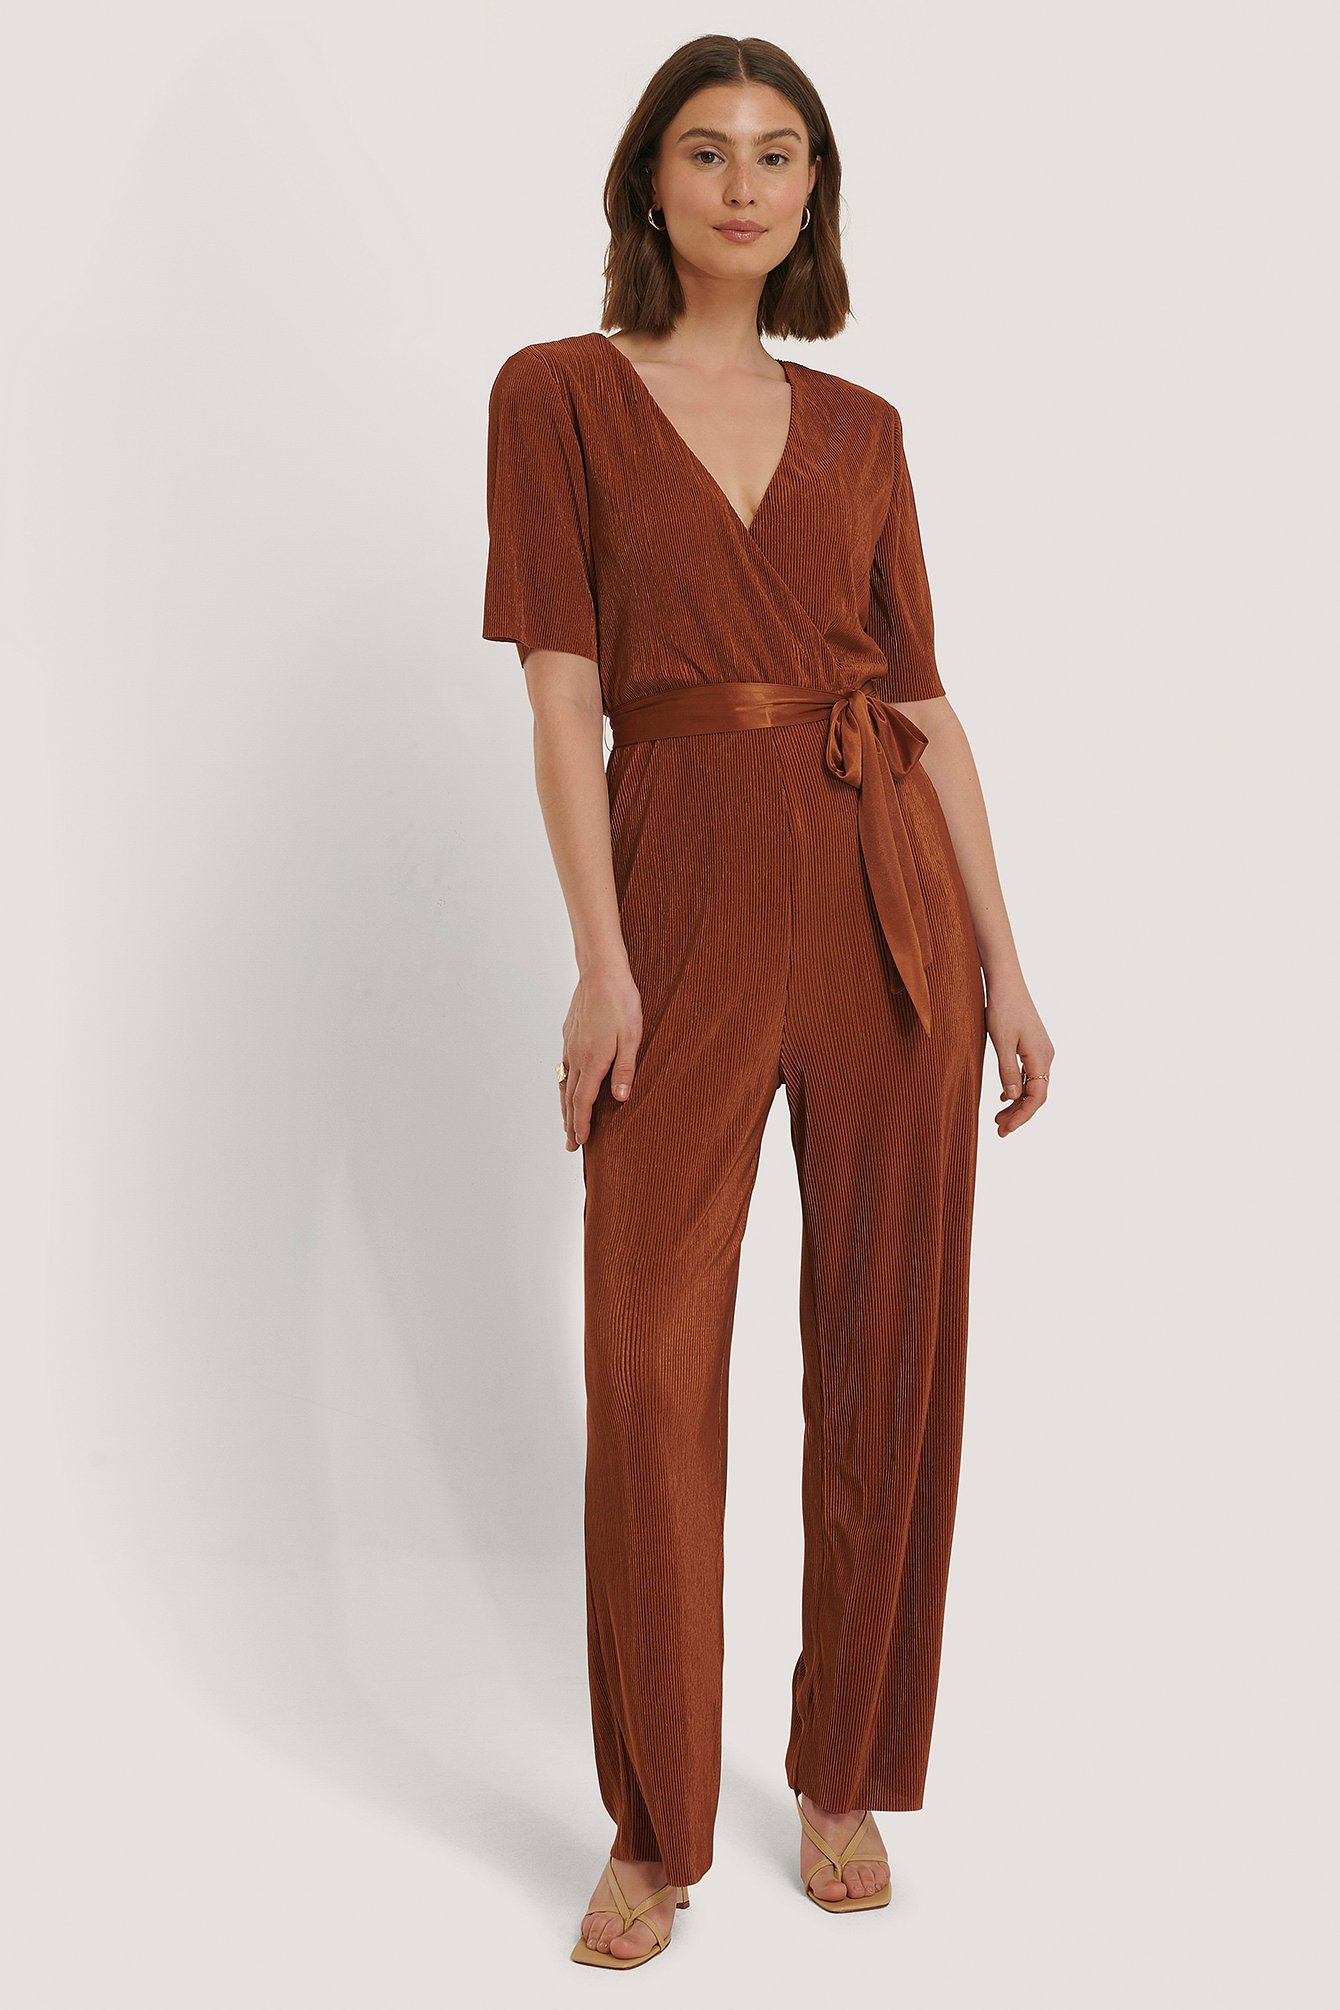 Pleated Tie Jumpsuit Outfit.